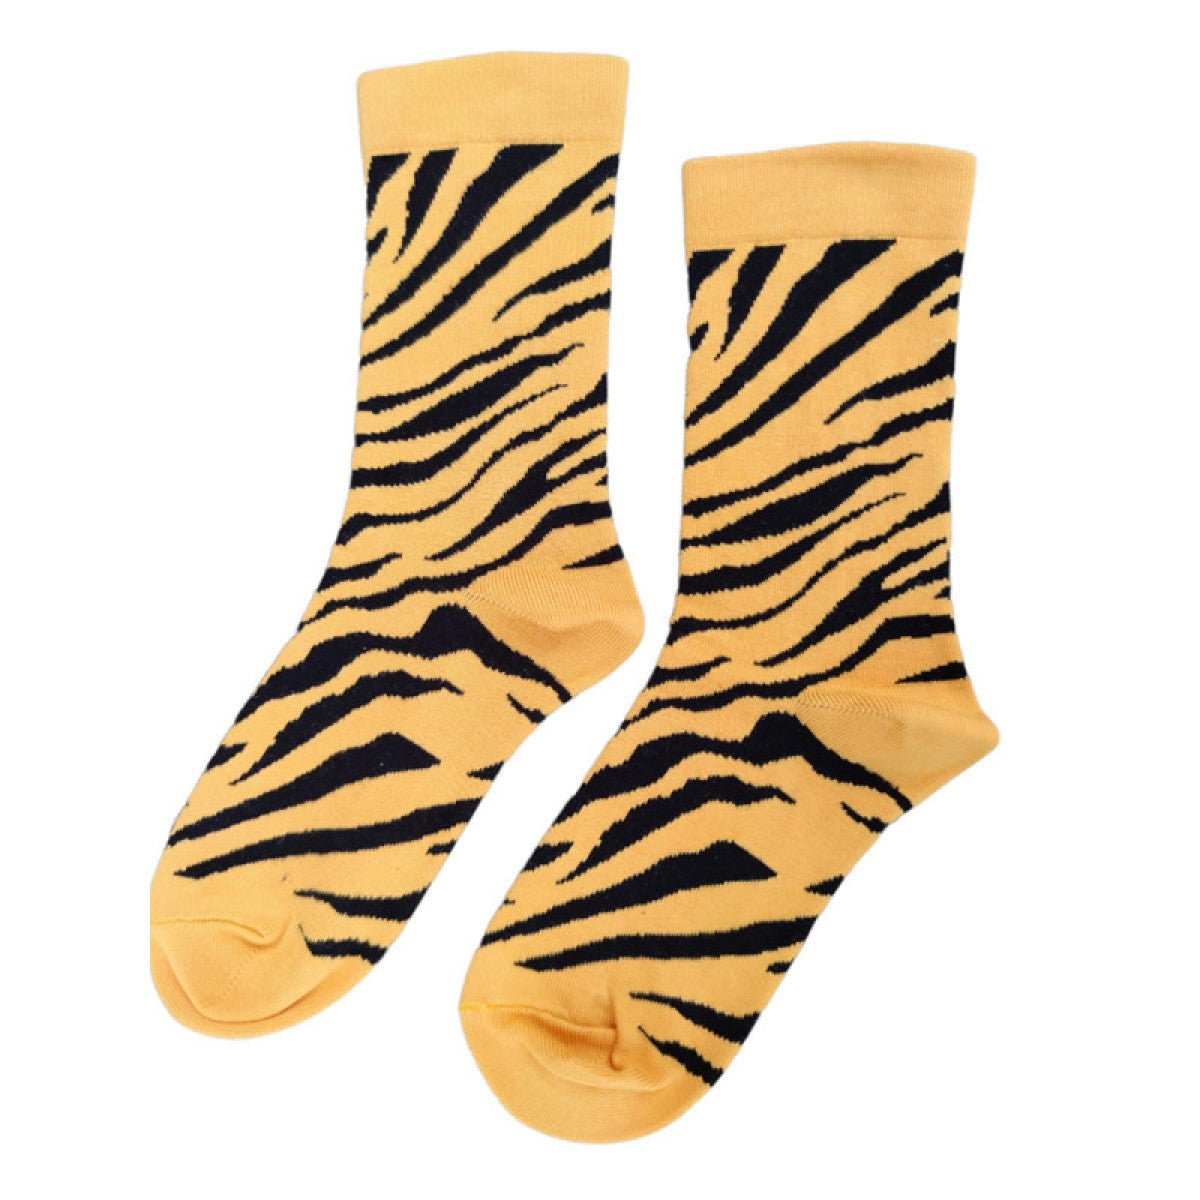 Pale yellow bamboo socks with Tiger stripes, size 4-7